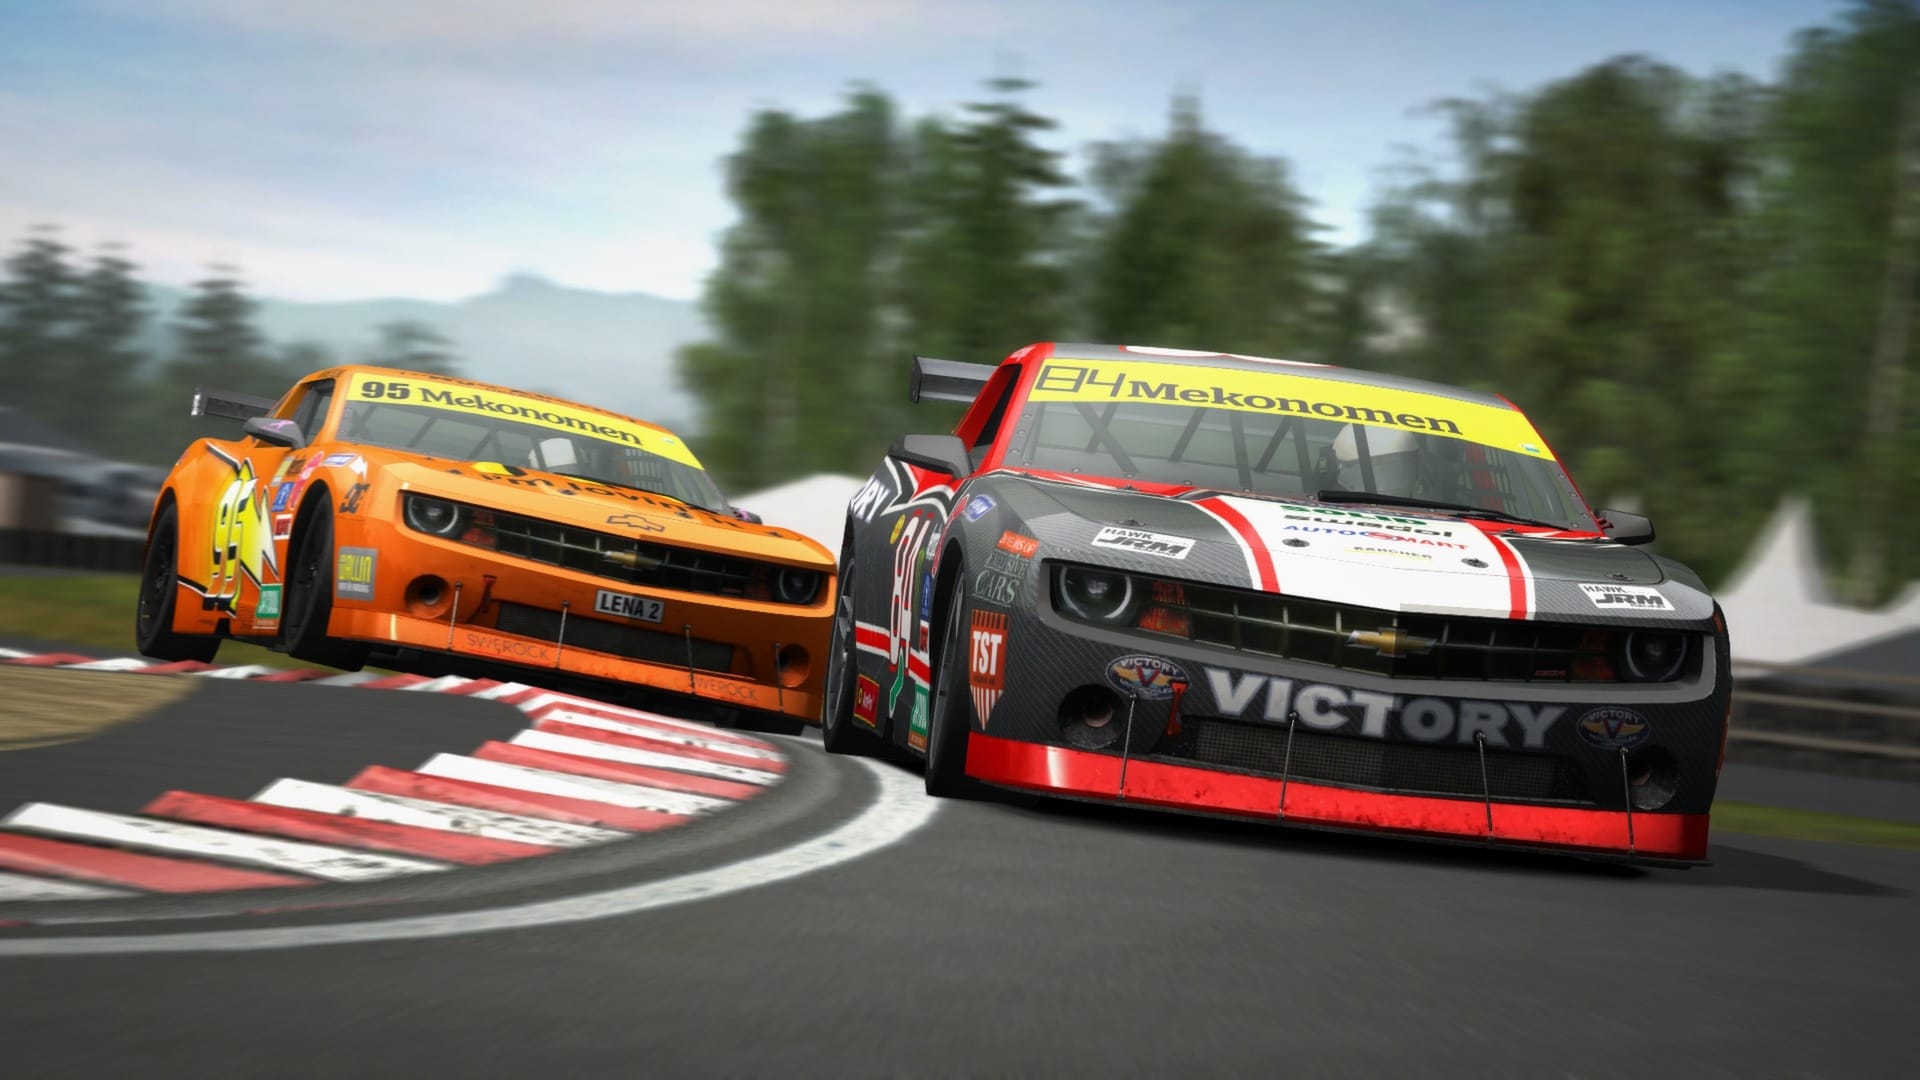 Best racing games 2022 for PC | PCGamesN